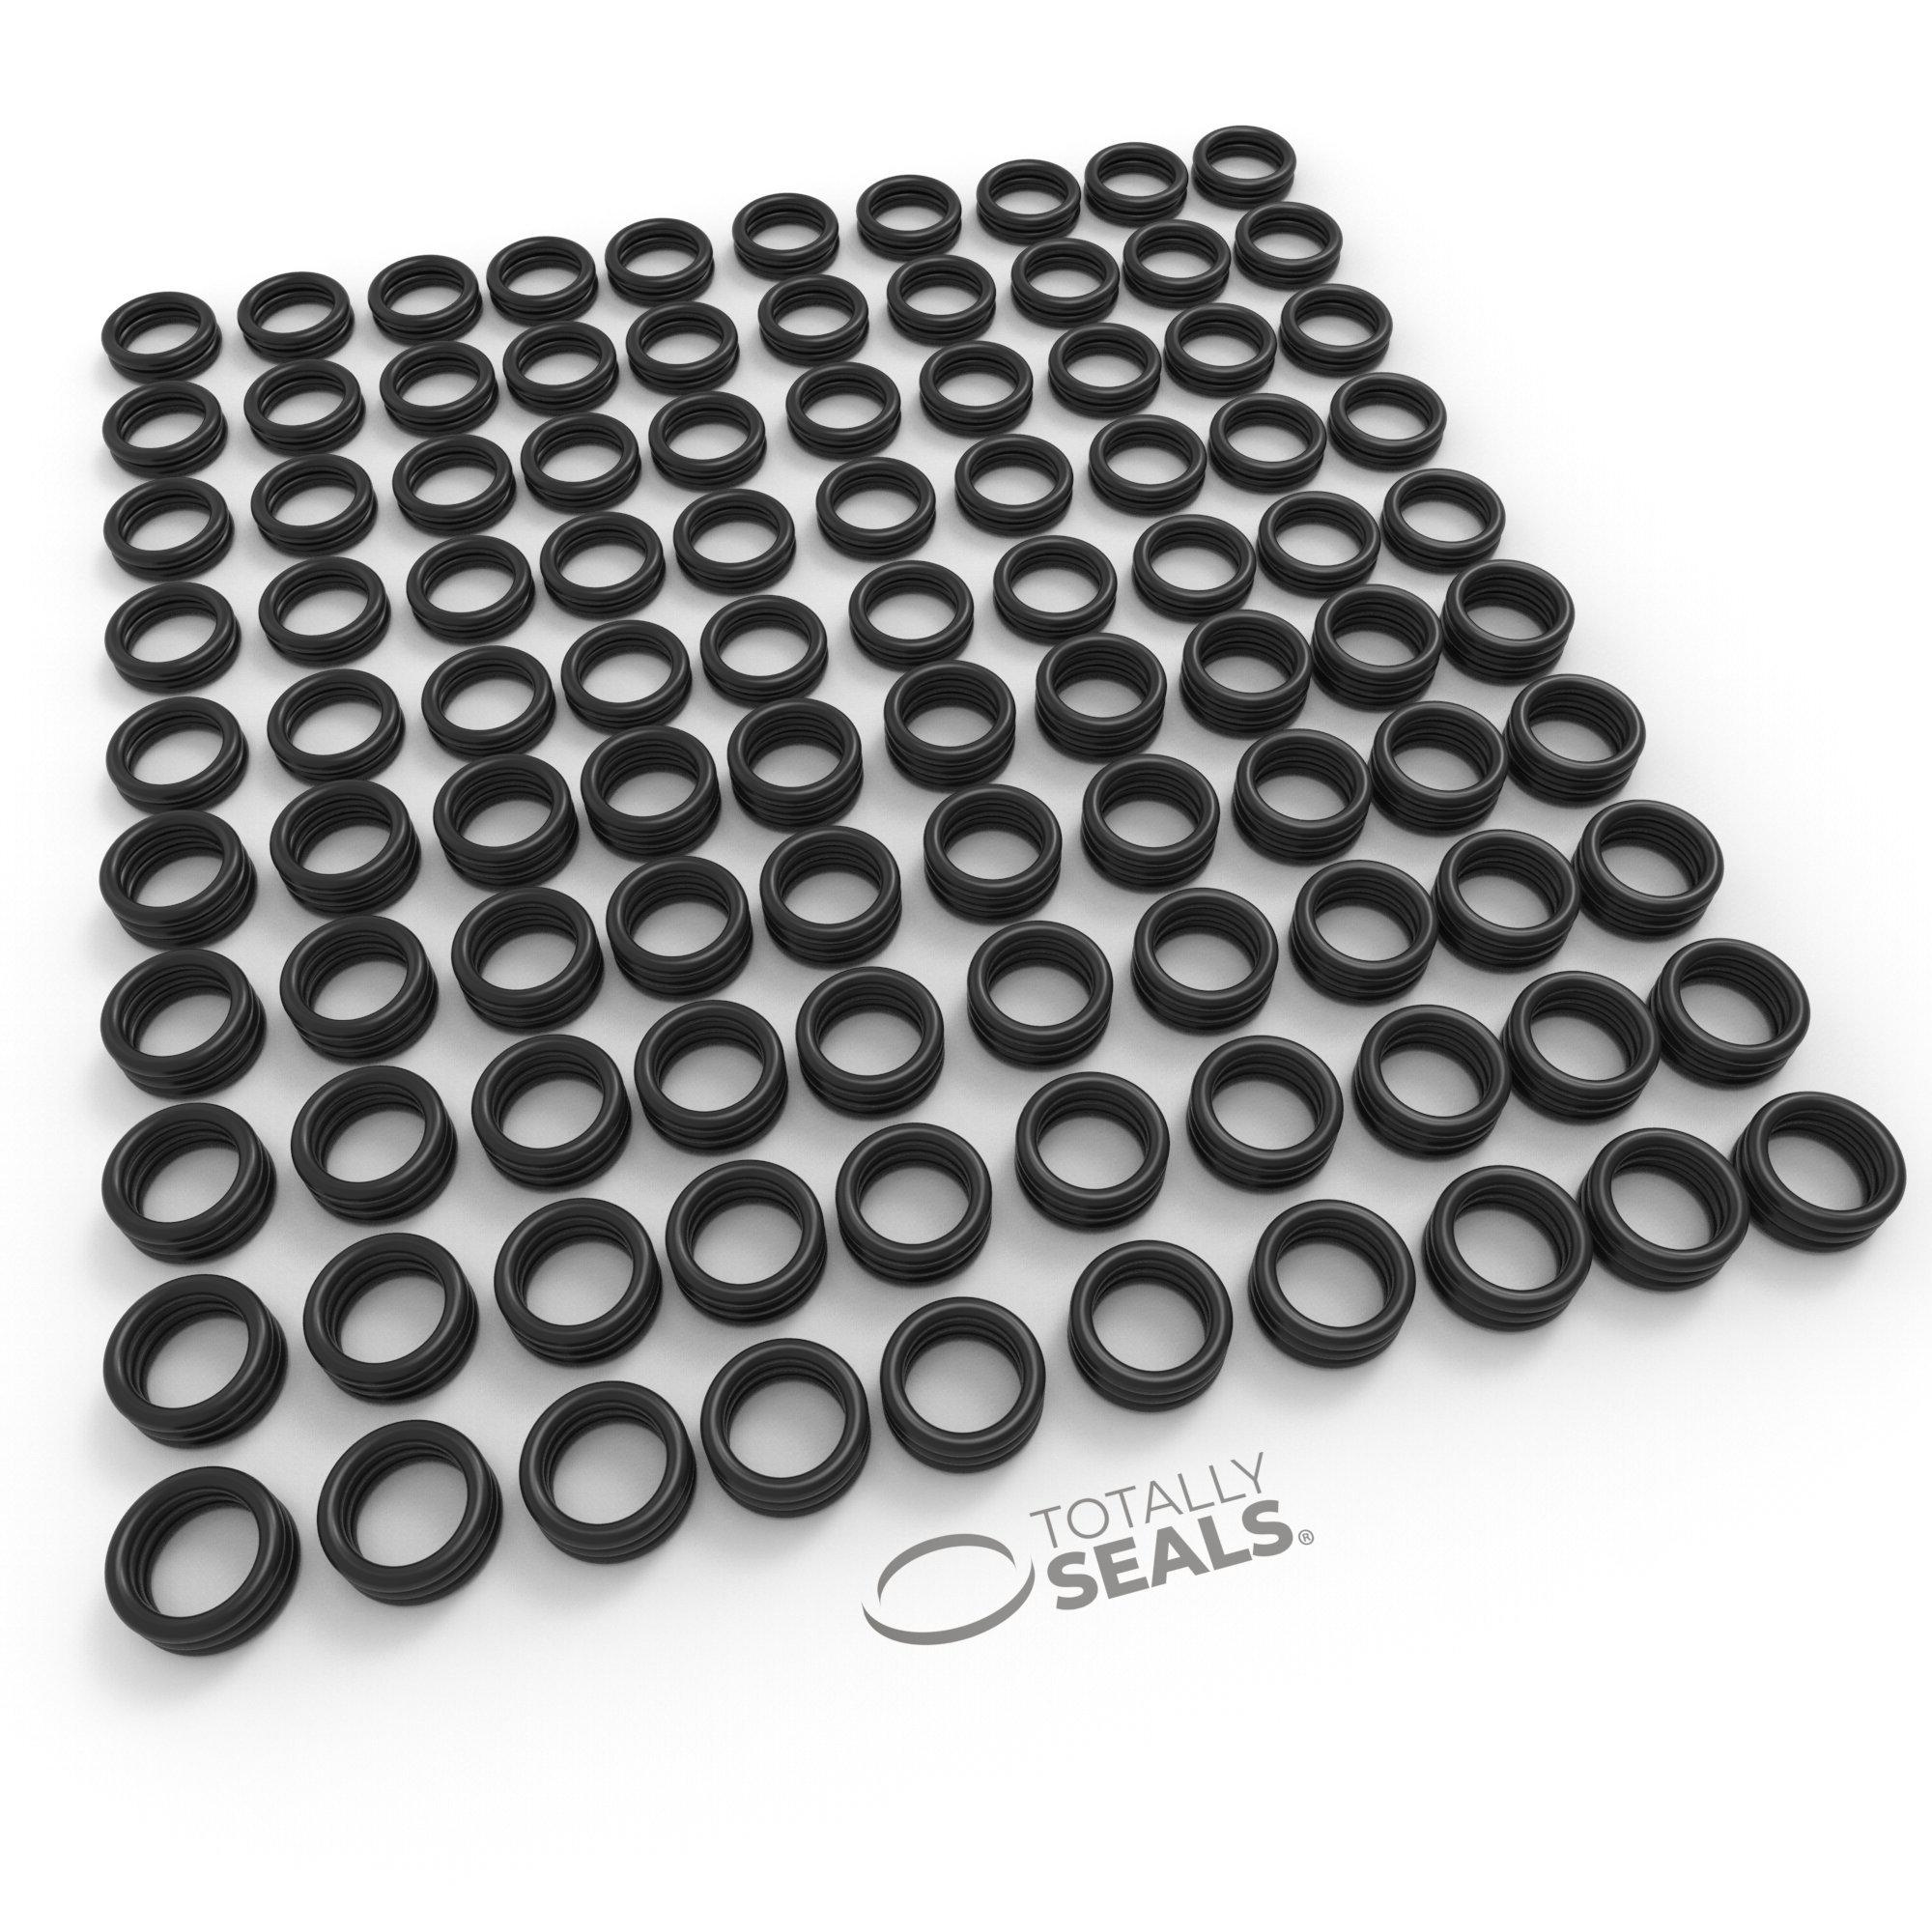 Back in Stock… Bulk Universal Poppet O-Rings in Food Safe Silicone + Save  via Early BF Sale | Homebrew Finds